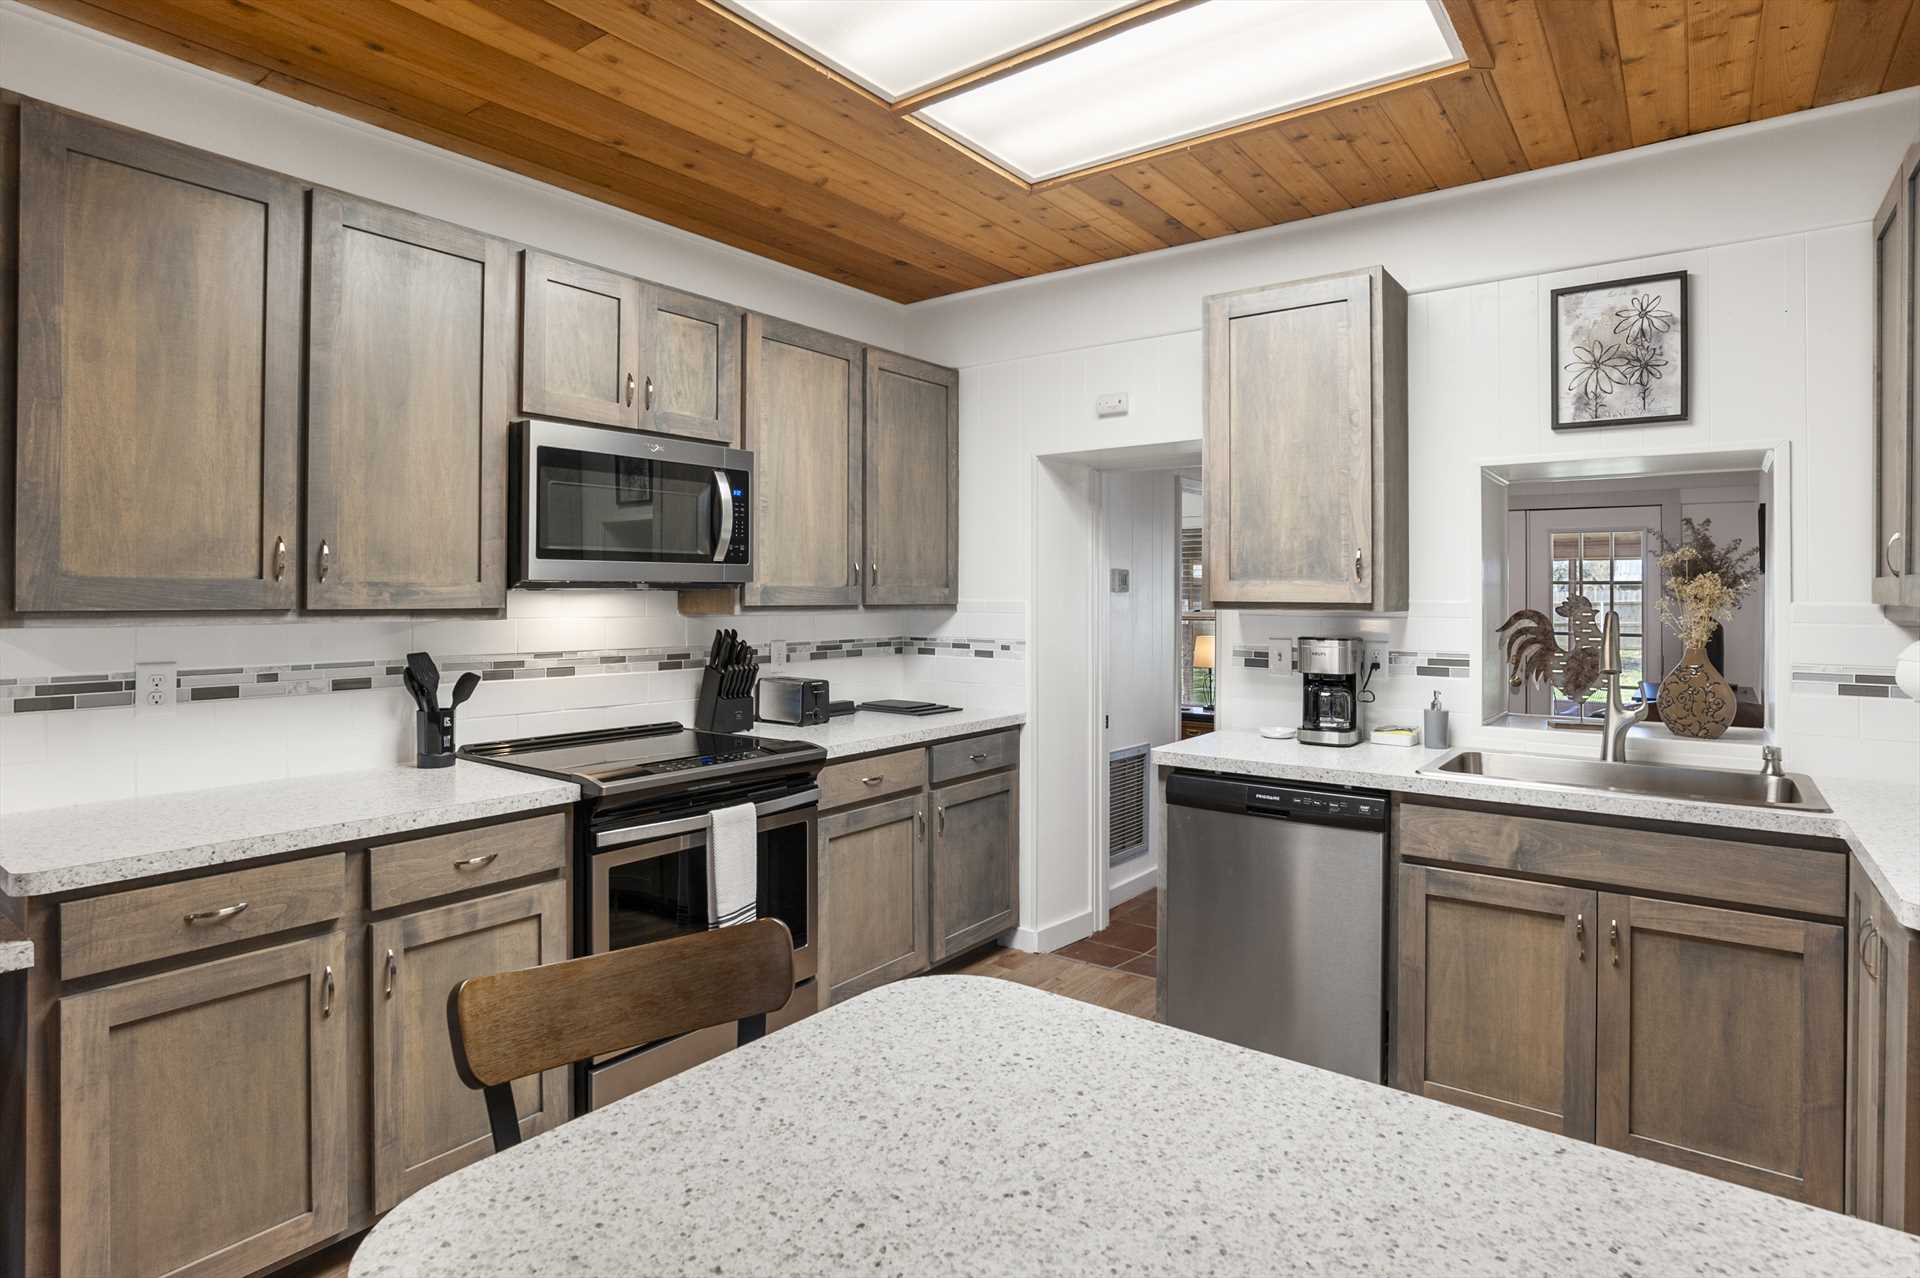                                                 The newly-remodeled kitchen includes an oven, microwave, fridge, dishwasher, coffee maker, and toaster!